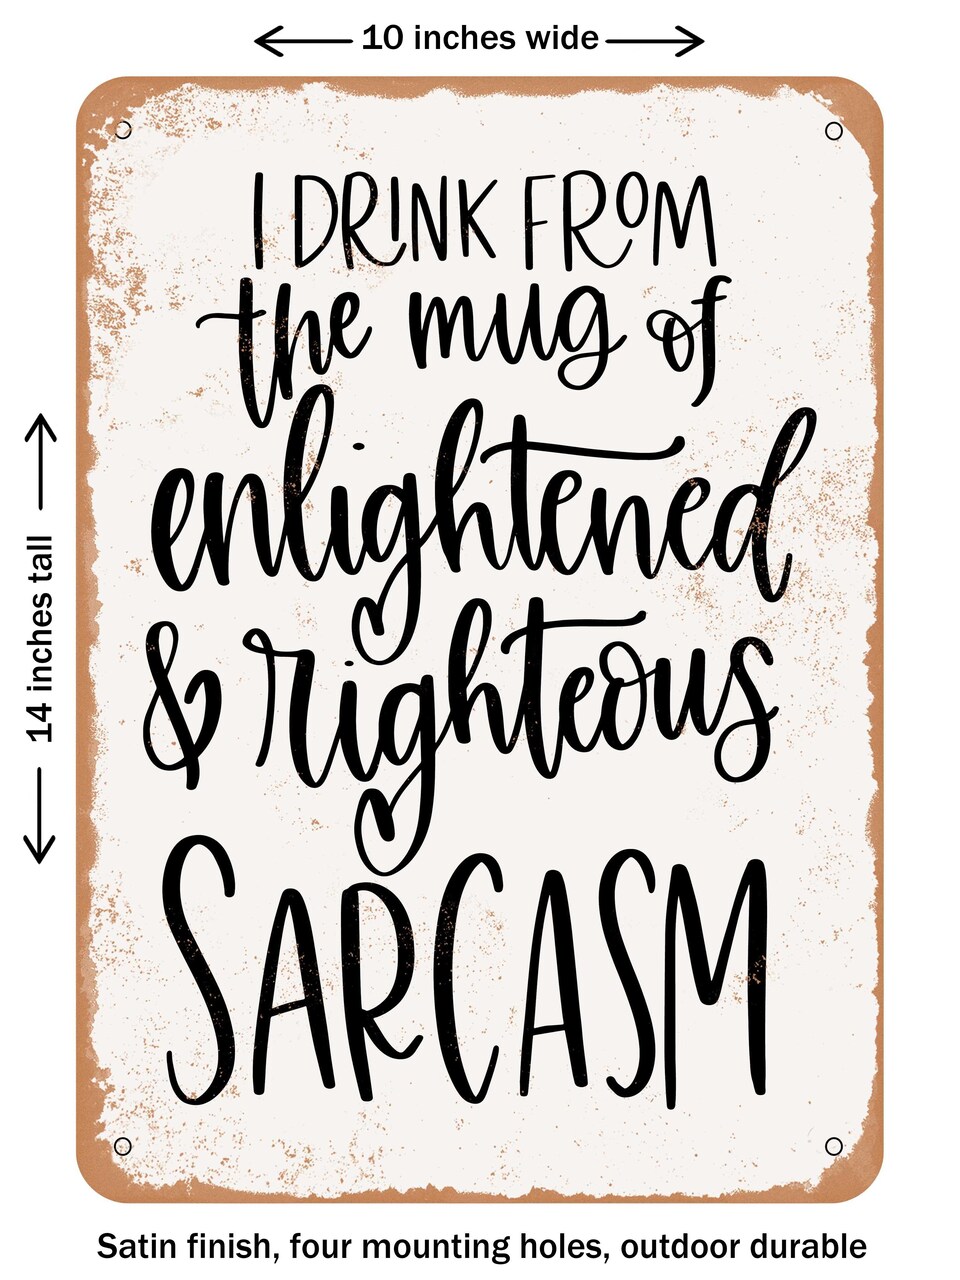 DECORATIVE METAL SIGN - Enlightened and Righteous Sarcasm  - Vintage Rusty Look